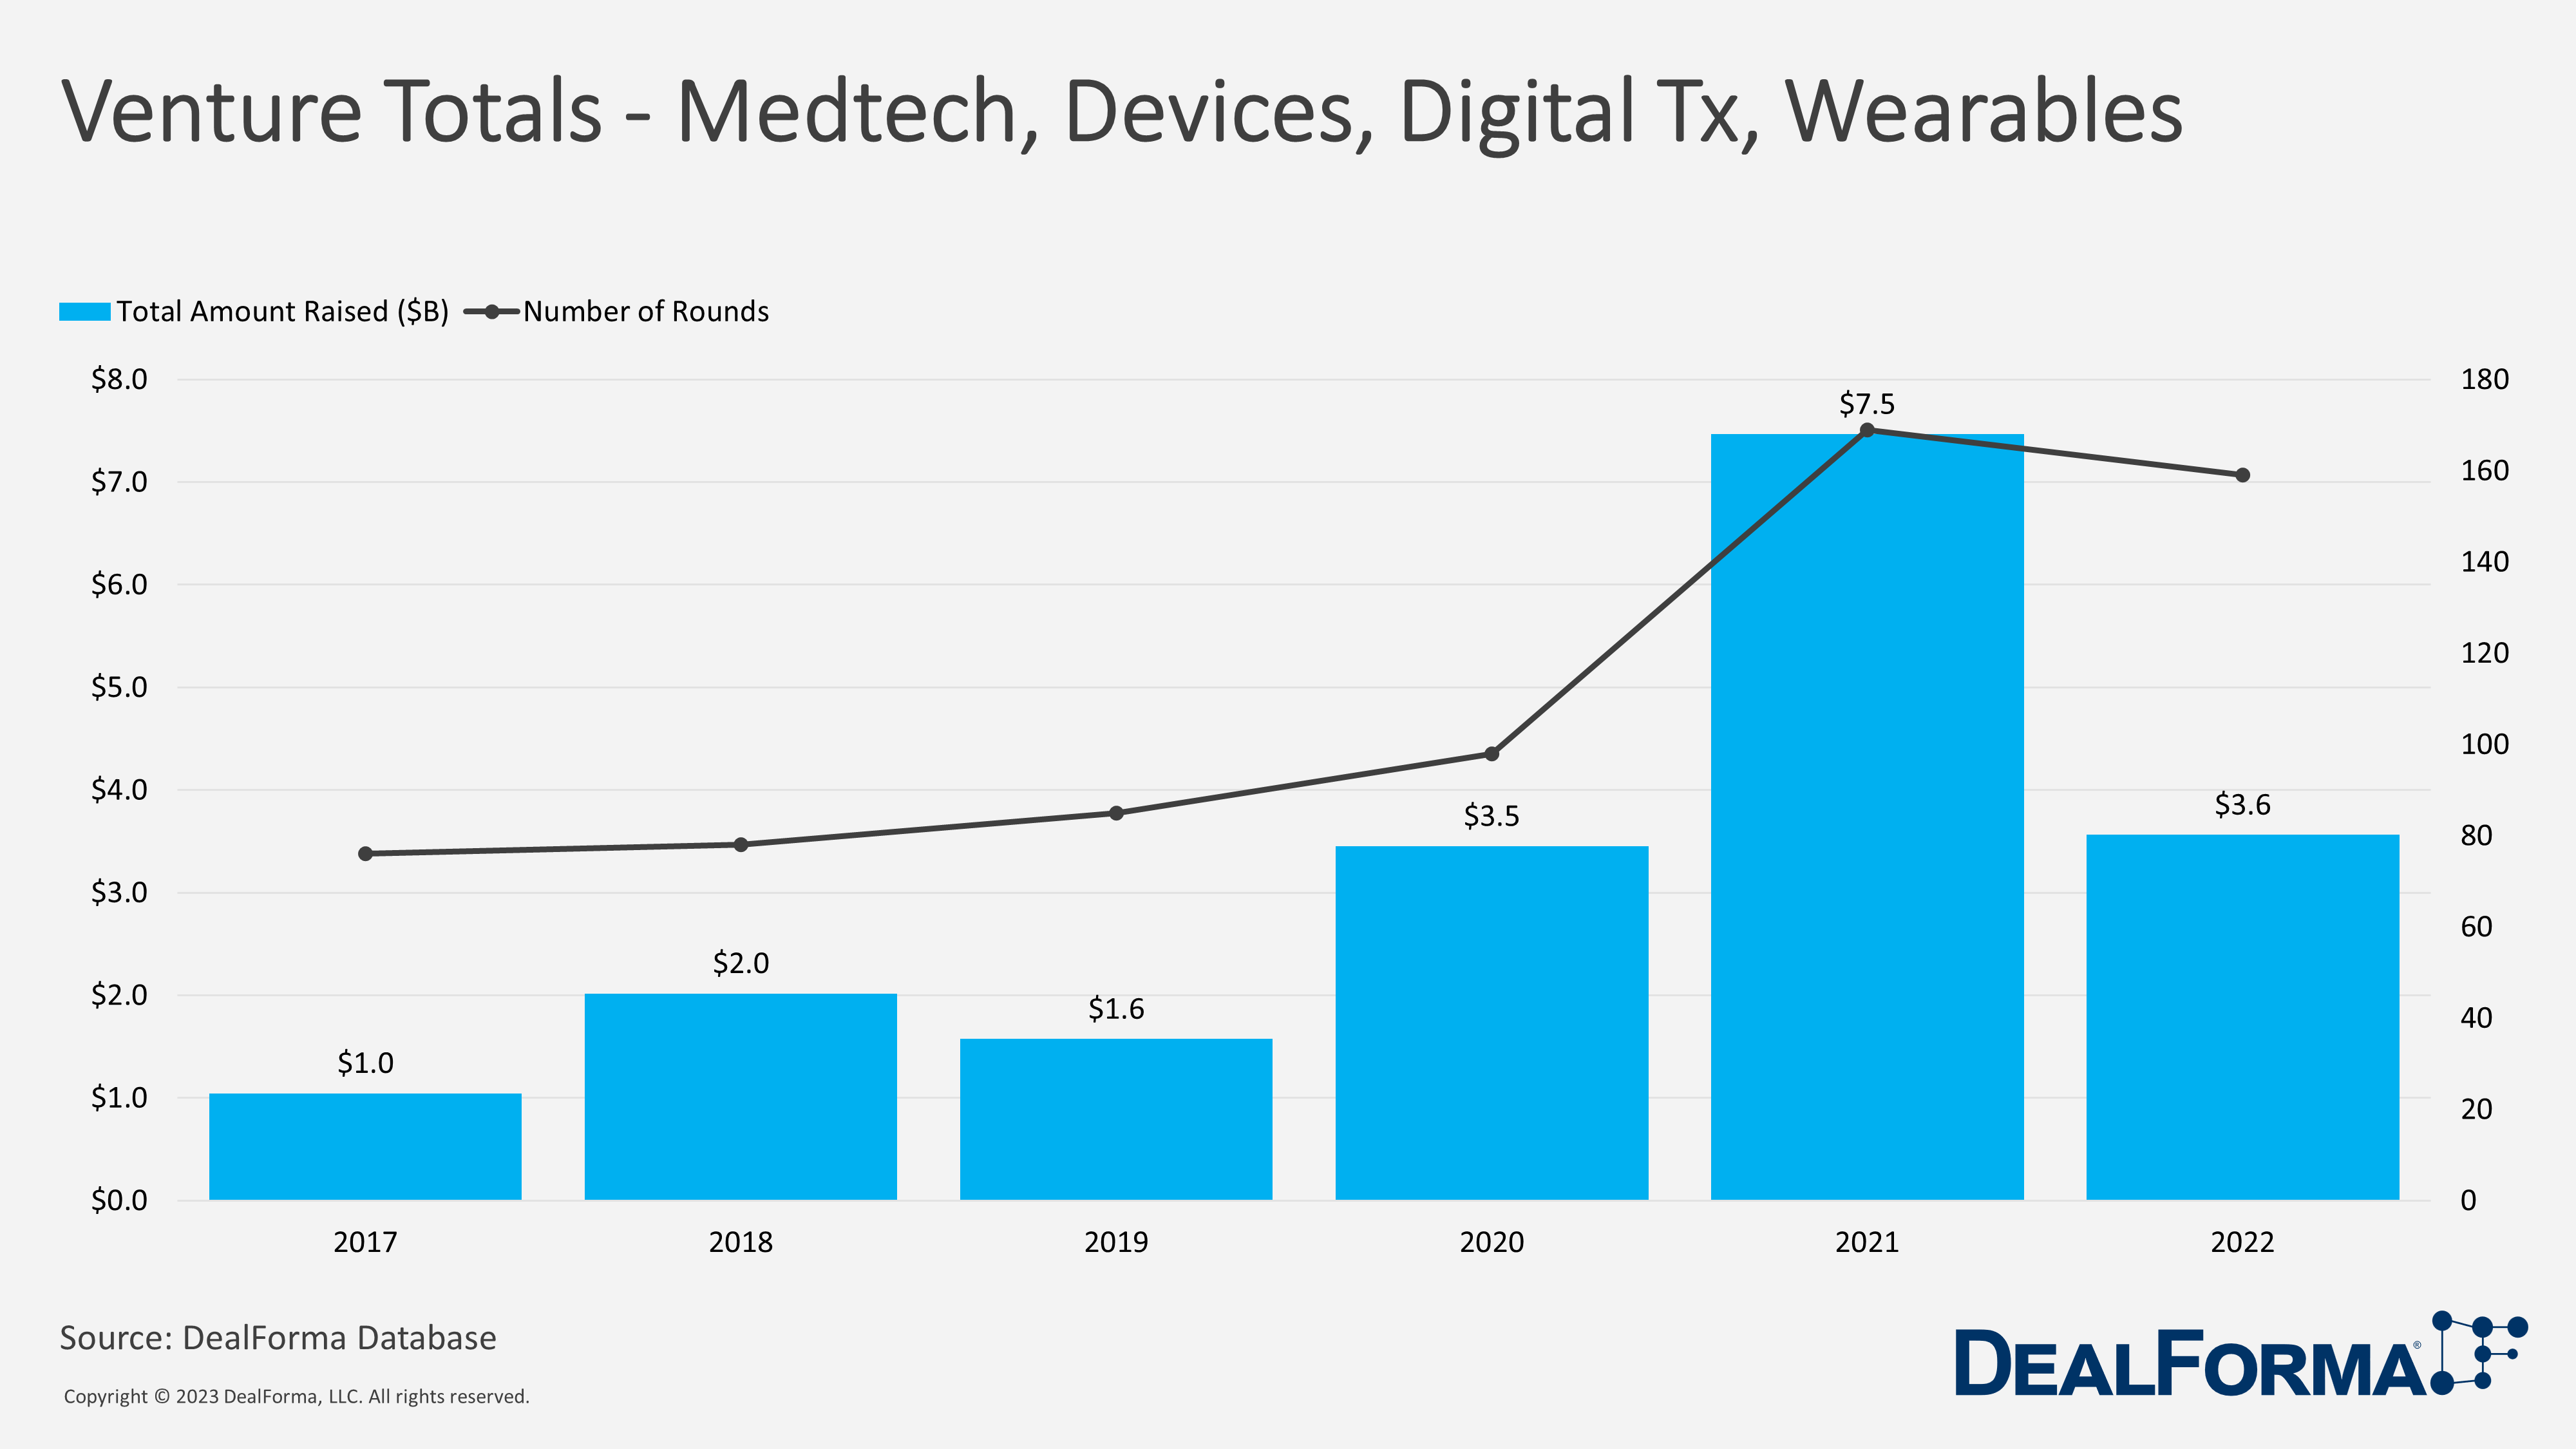 Venture Totals - Medtech, Devices, Digital Tx, Wearables